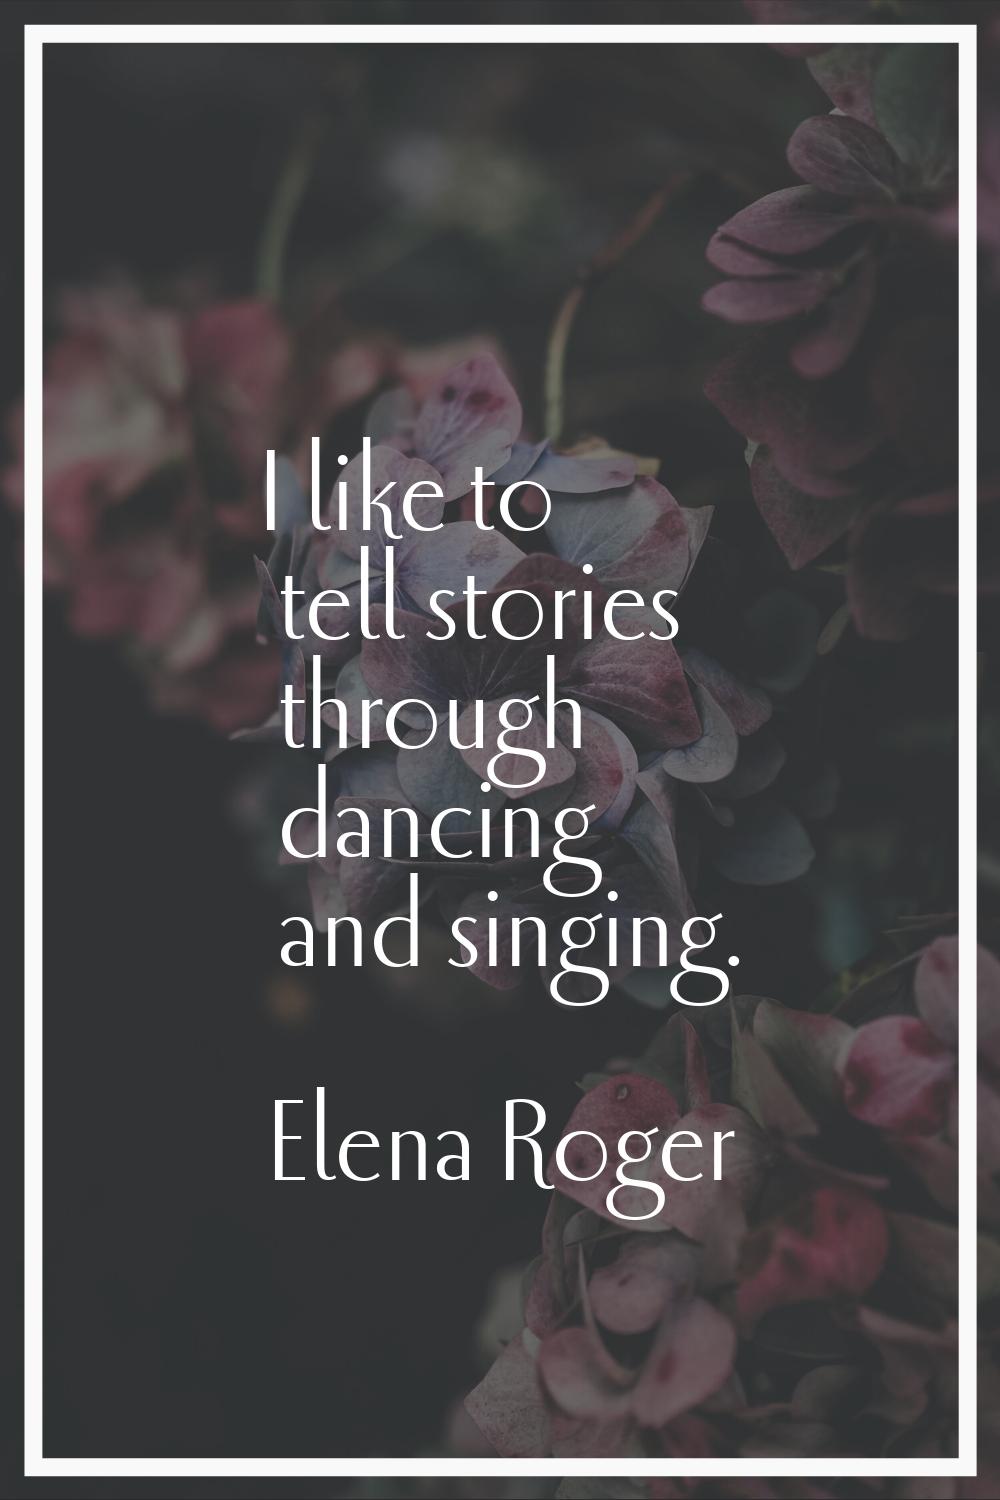 I like to tell stories through dancing and singing.